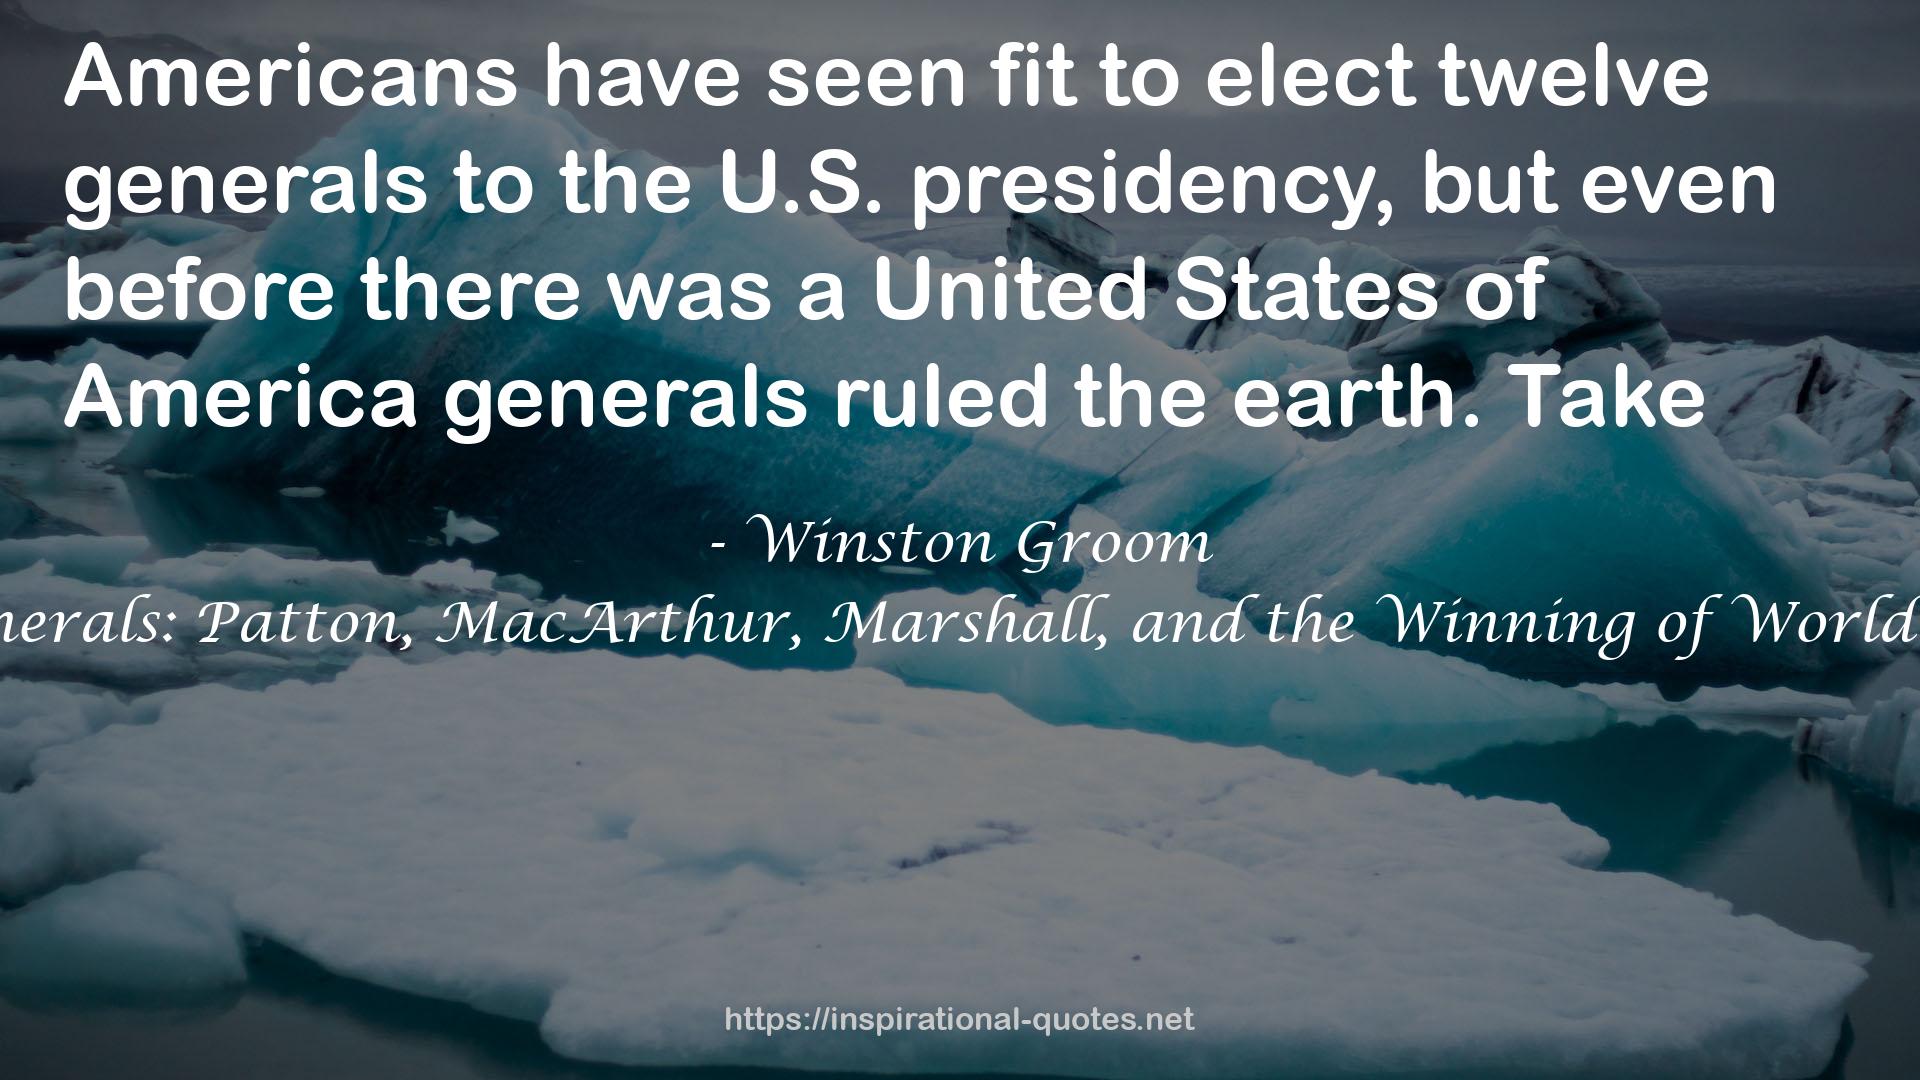 The Generals: Patton, MacArthur, Marshall, and the Winning of World War II QUOTES